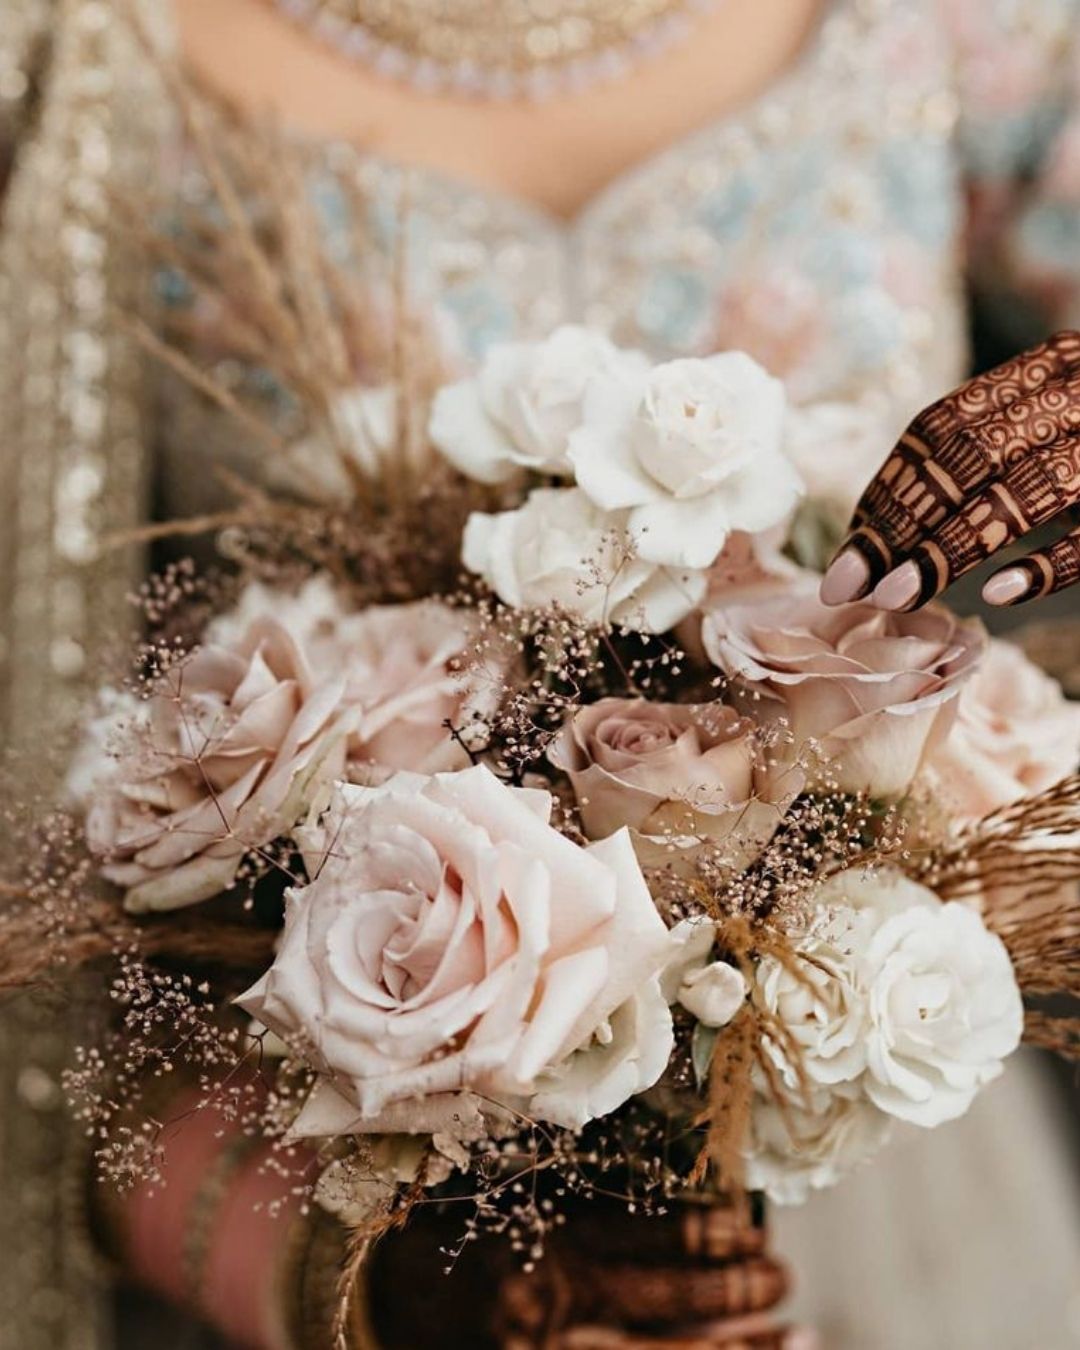 how to preserve wedding bouquet smal bouquets2